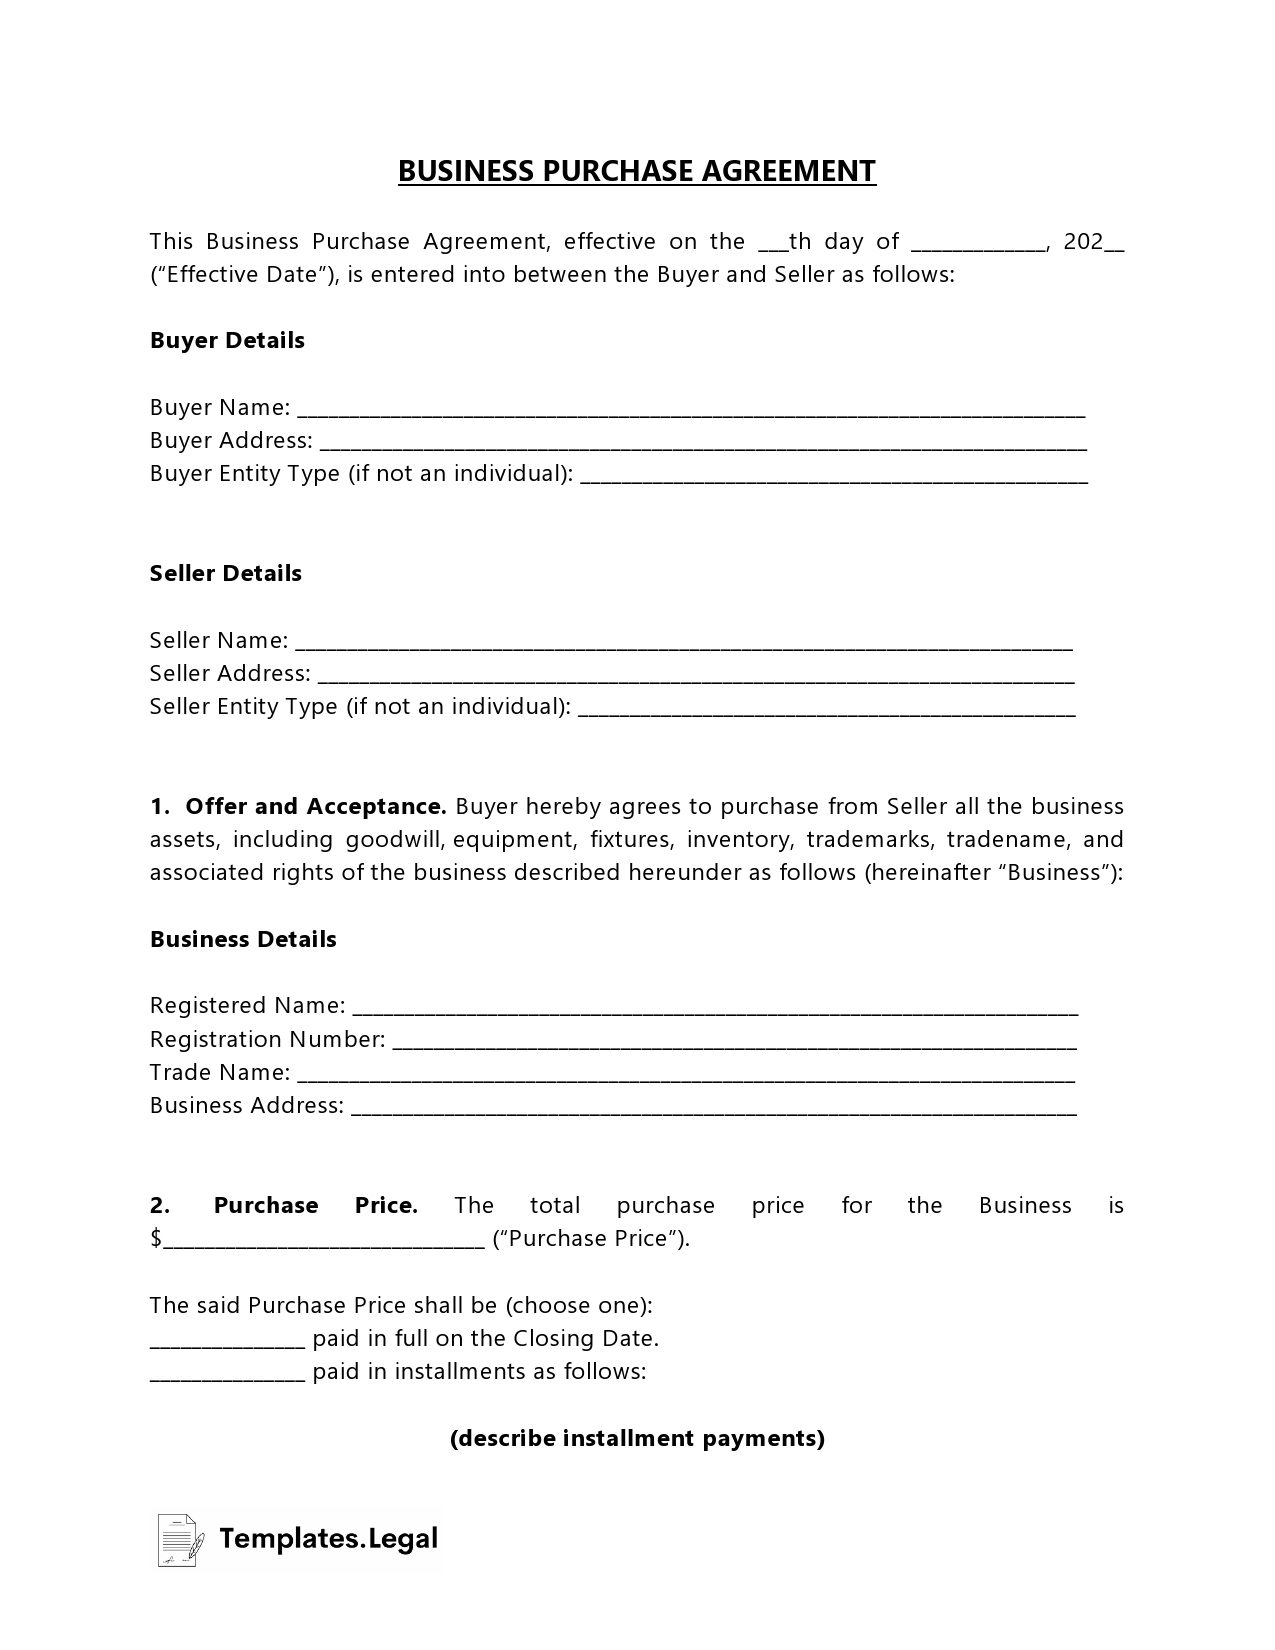 Free business purchase agreement 18